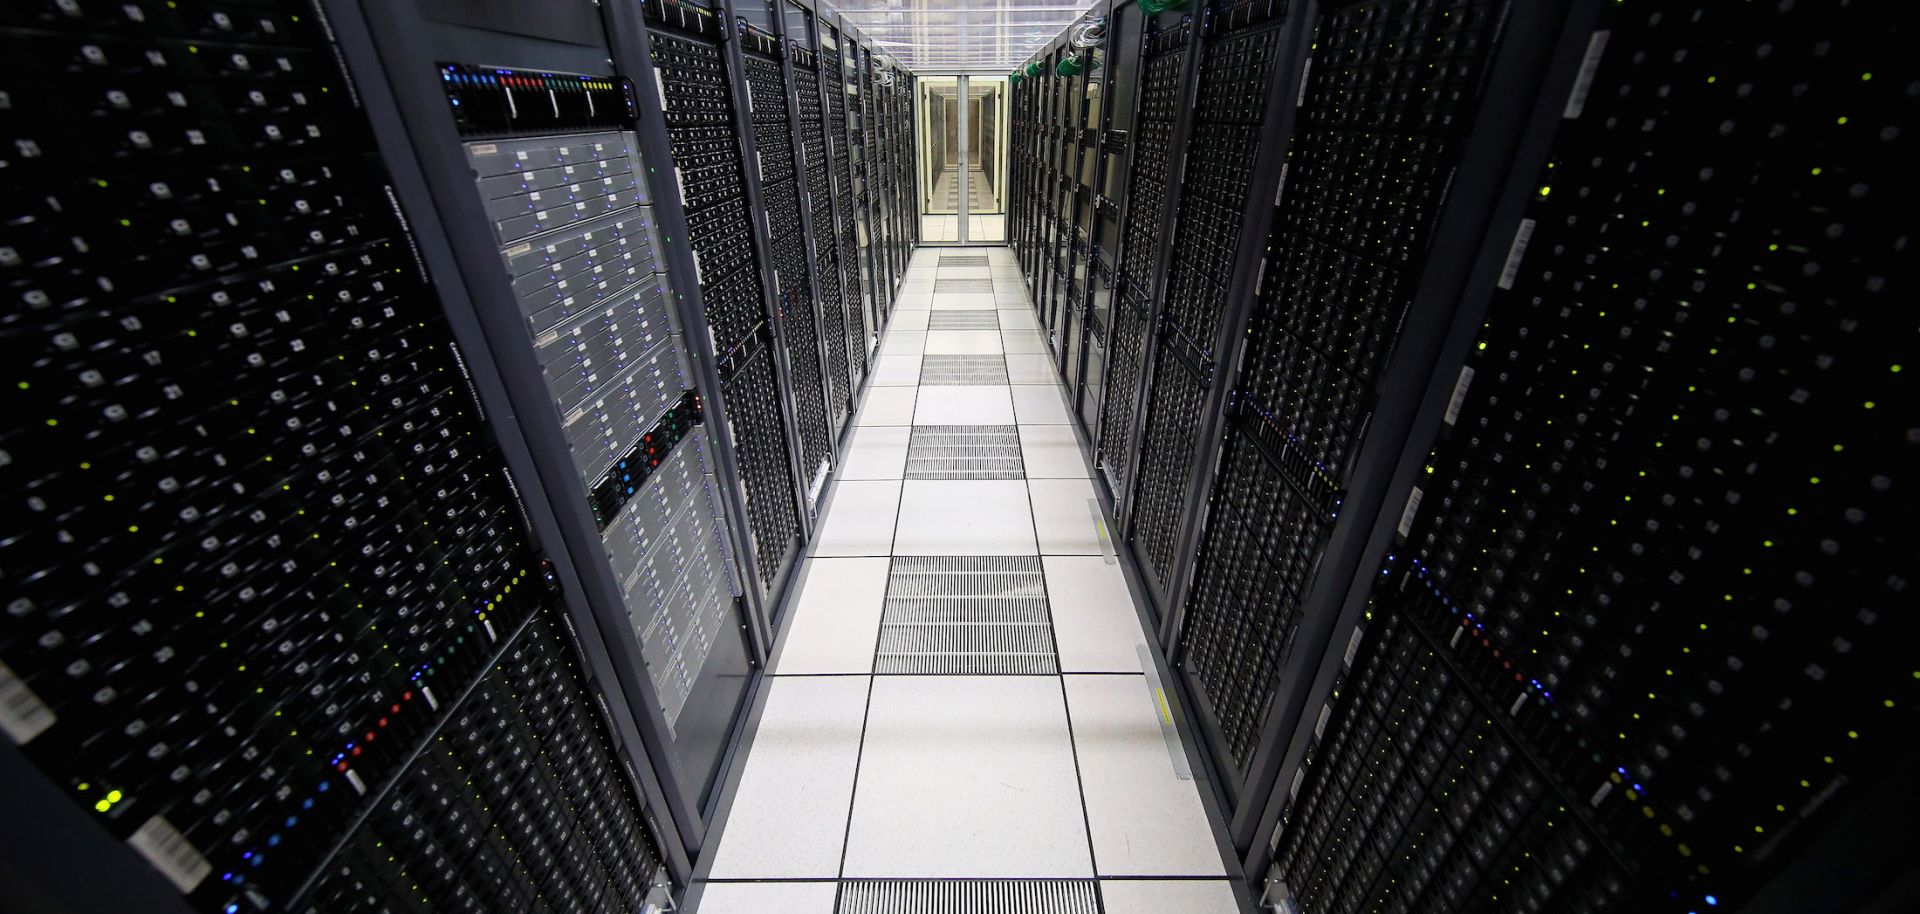 An image of CERN Data Centre and server farm on April 19, 2017 in Meyrin, Switzerland.